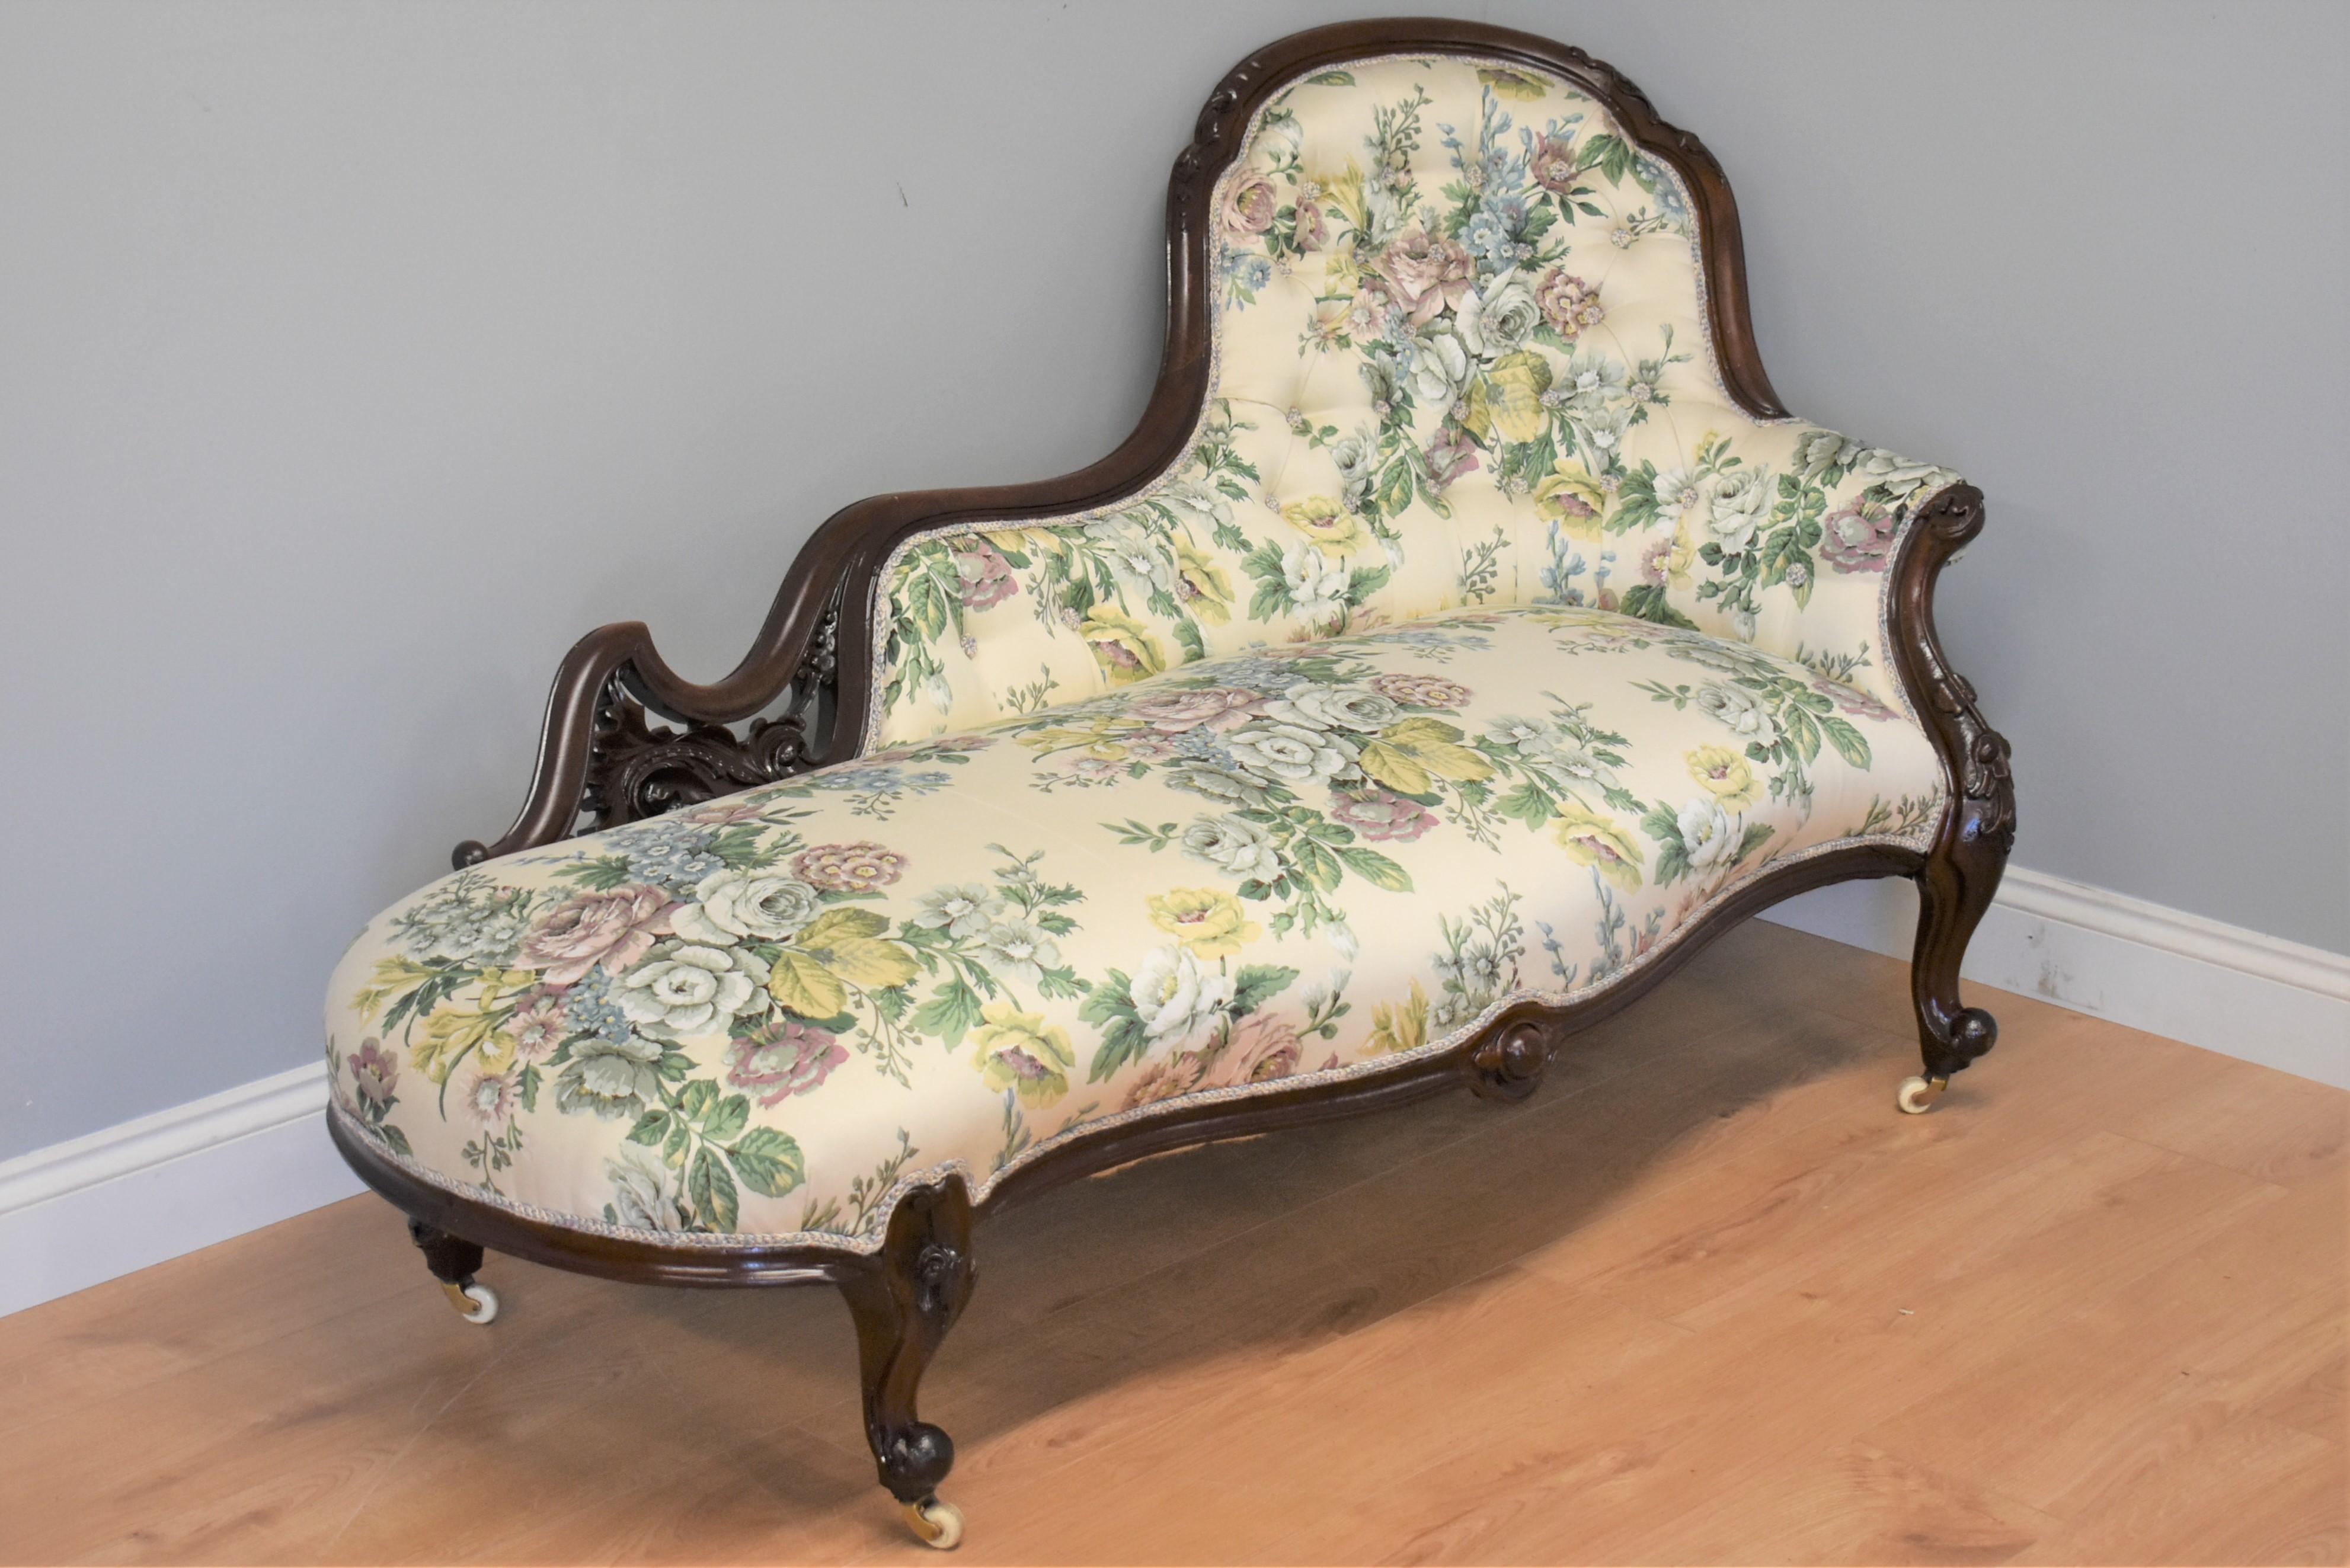 Victorian mahogany chaise longue in very nice condition, the frame has carved scrolls and stands on cabriole legs with castors. The chaise is upholstered in vintage Sanderson 'knowle' pattern satin fabric and in lovely condition.